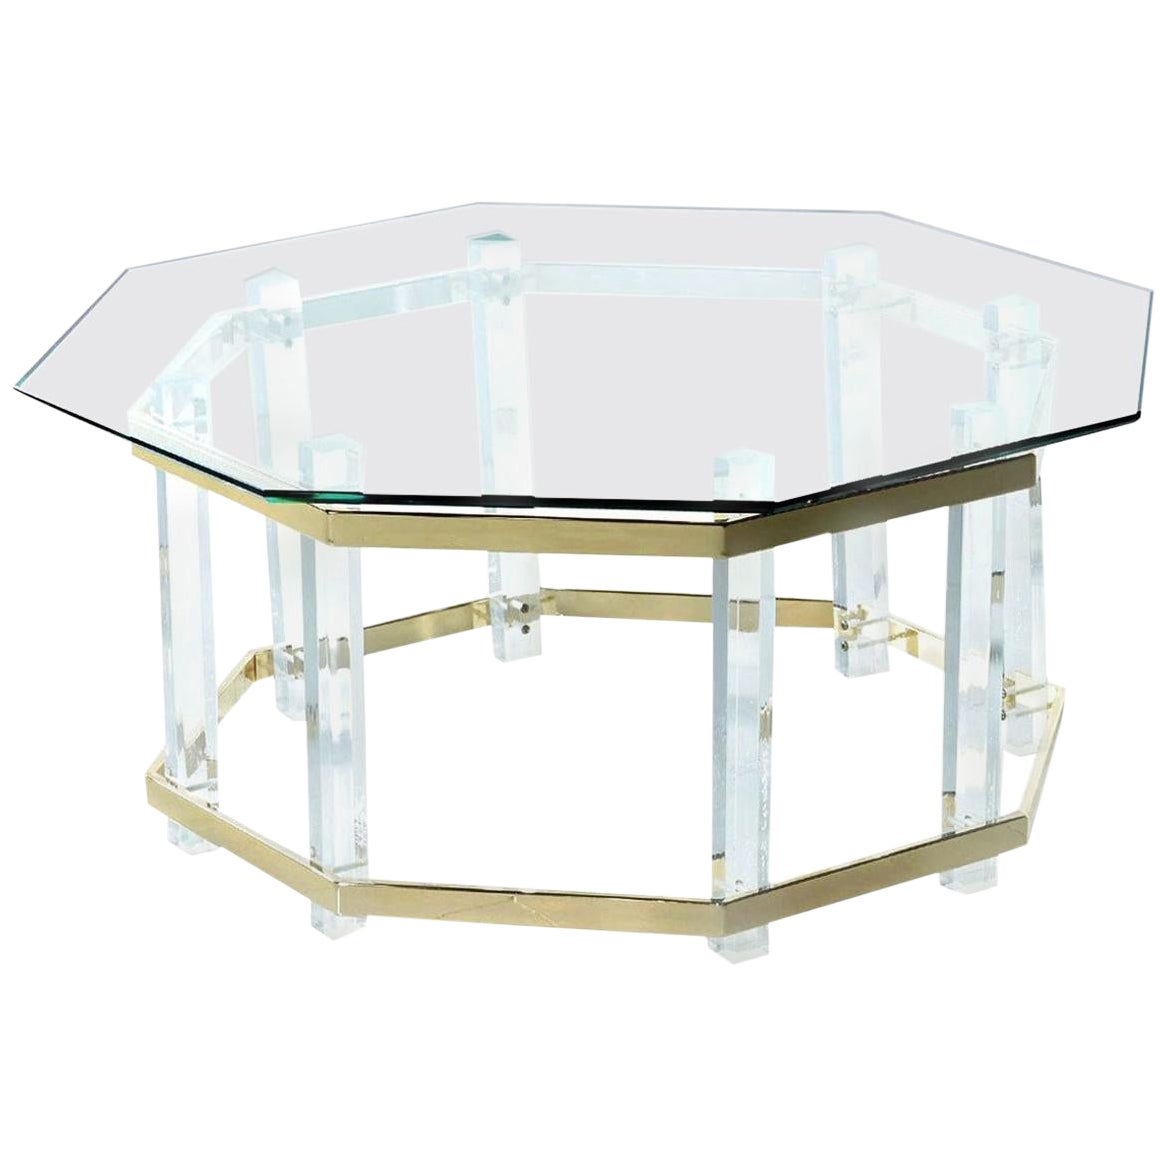 Acrylic Lucite Glass and Brass Coffee Table 1970s Hollywood Regency